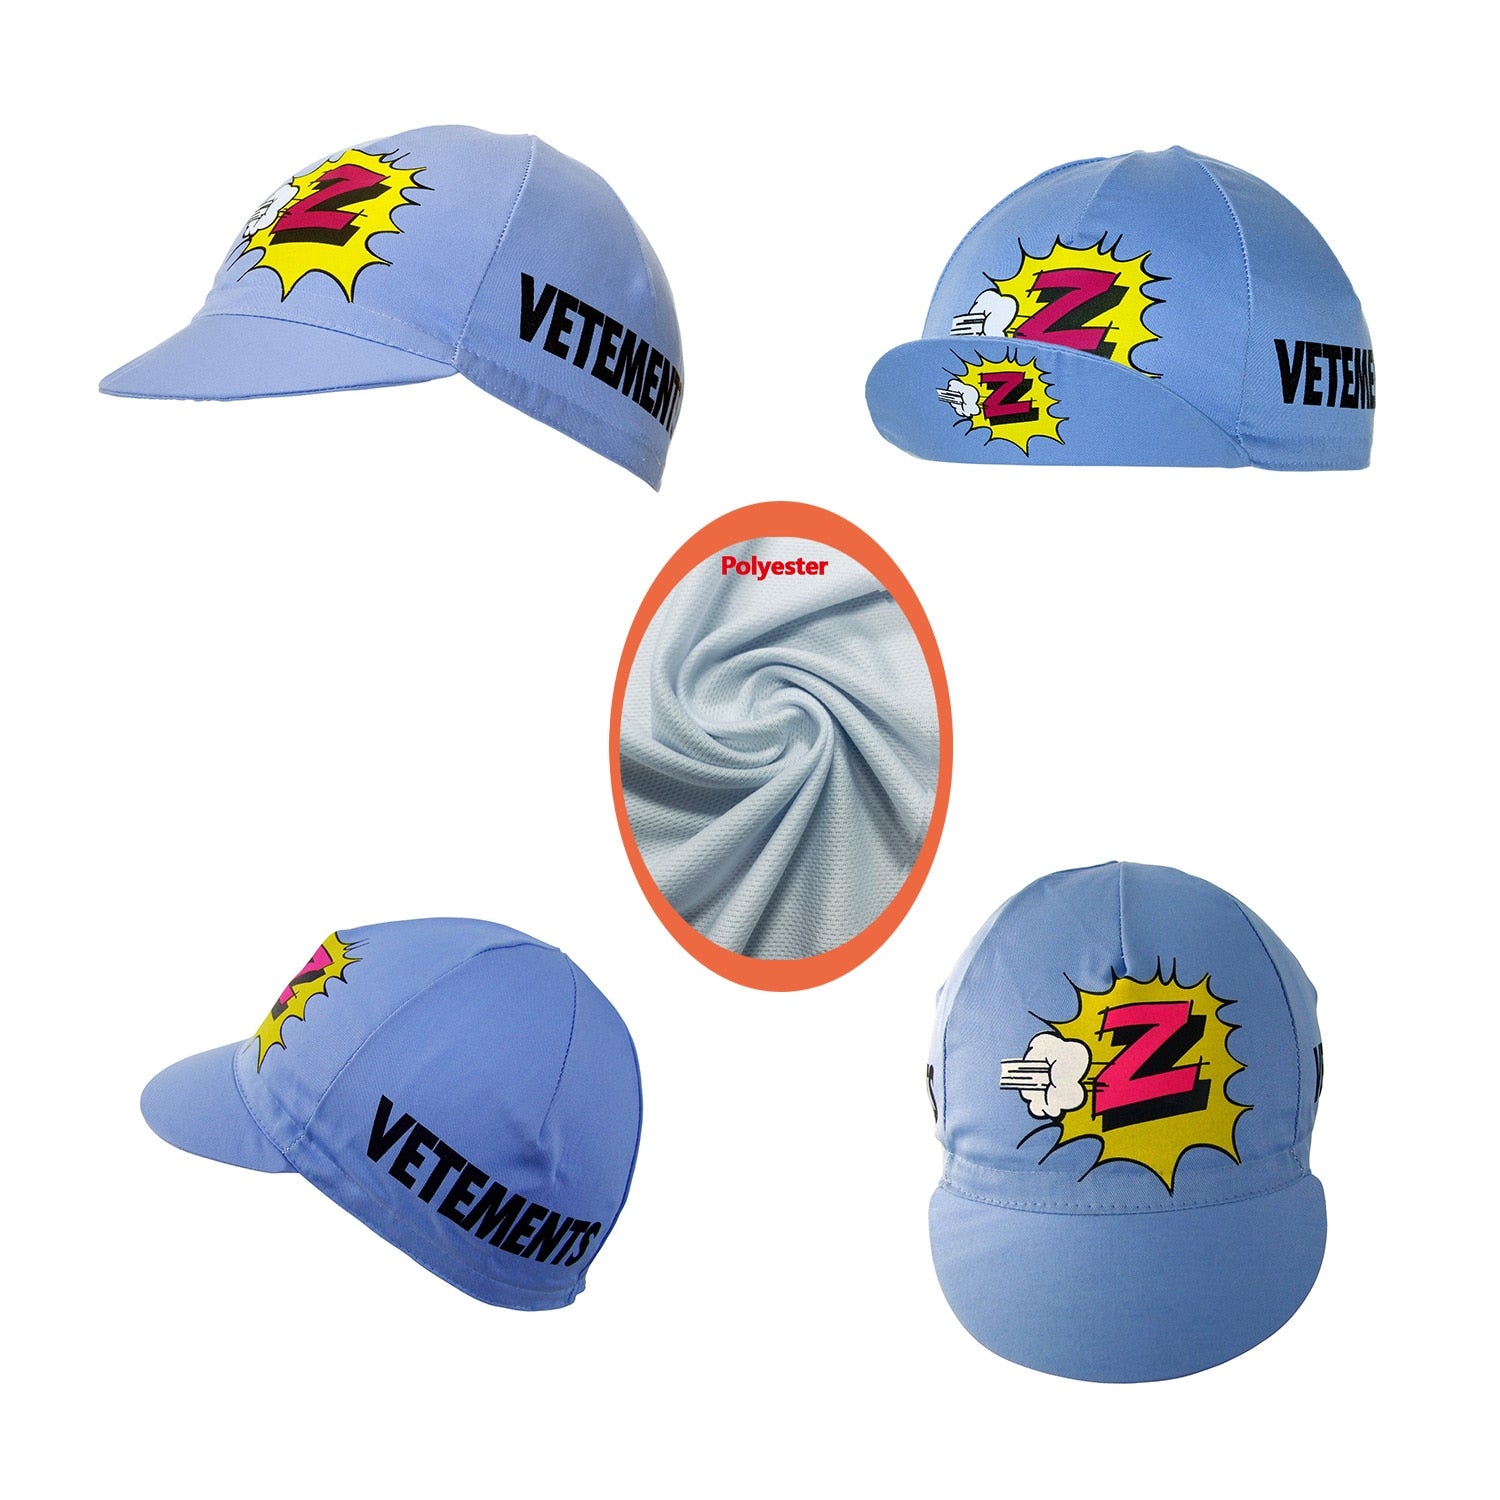 Multiple choices Cycling Cap